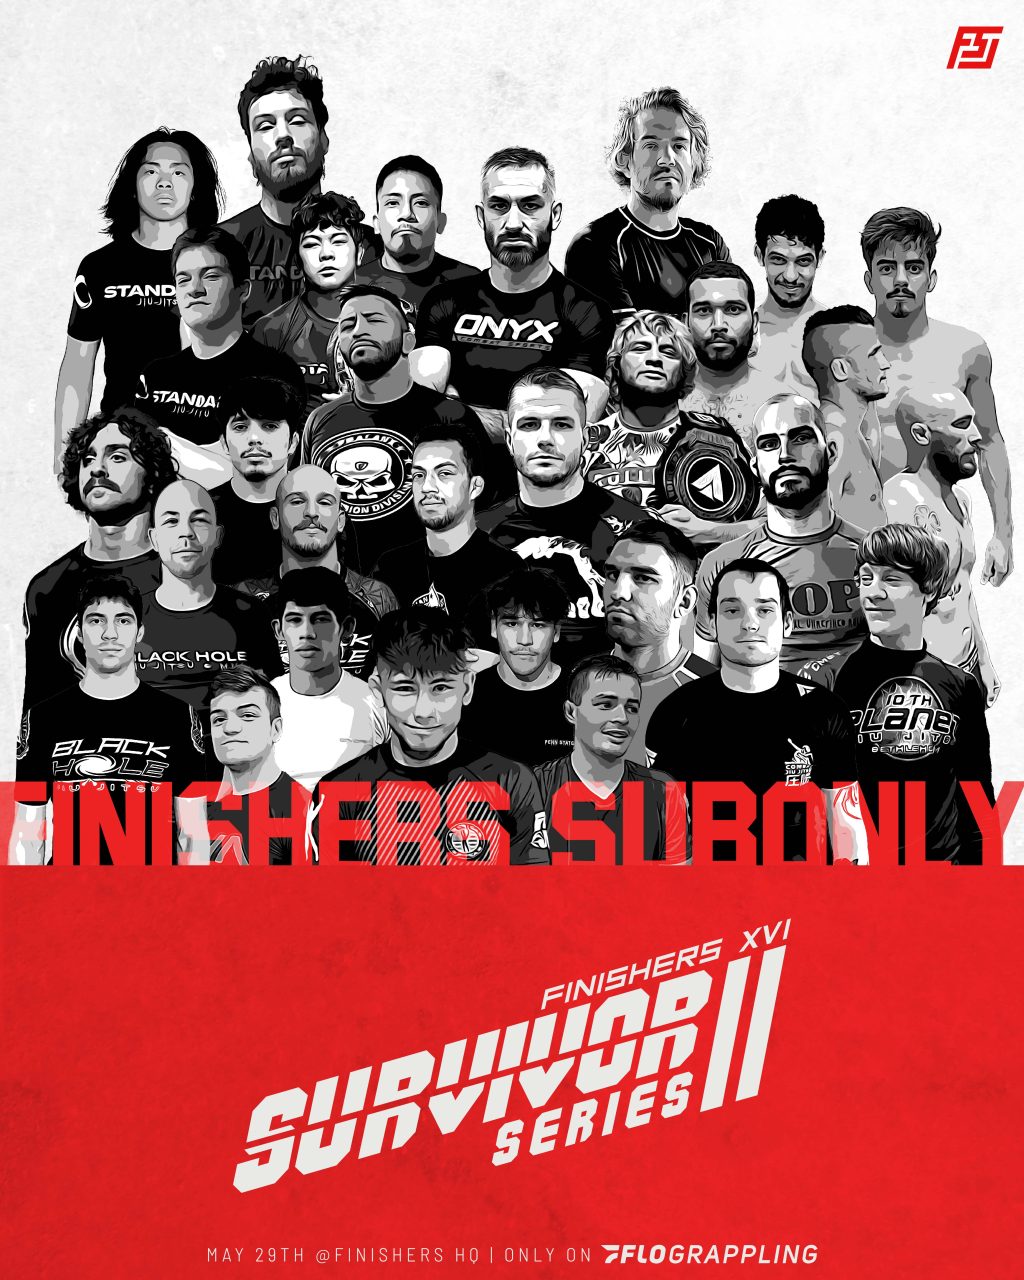 Finishers Survivor Series 2 Preview